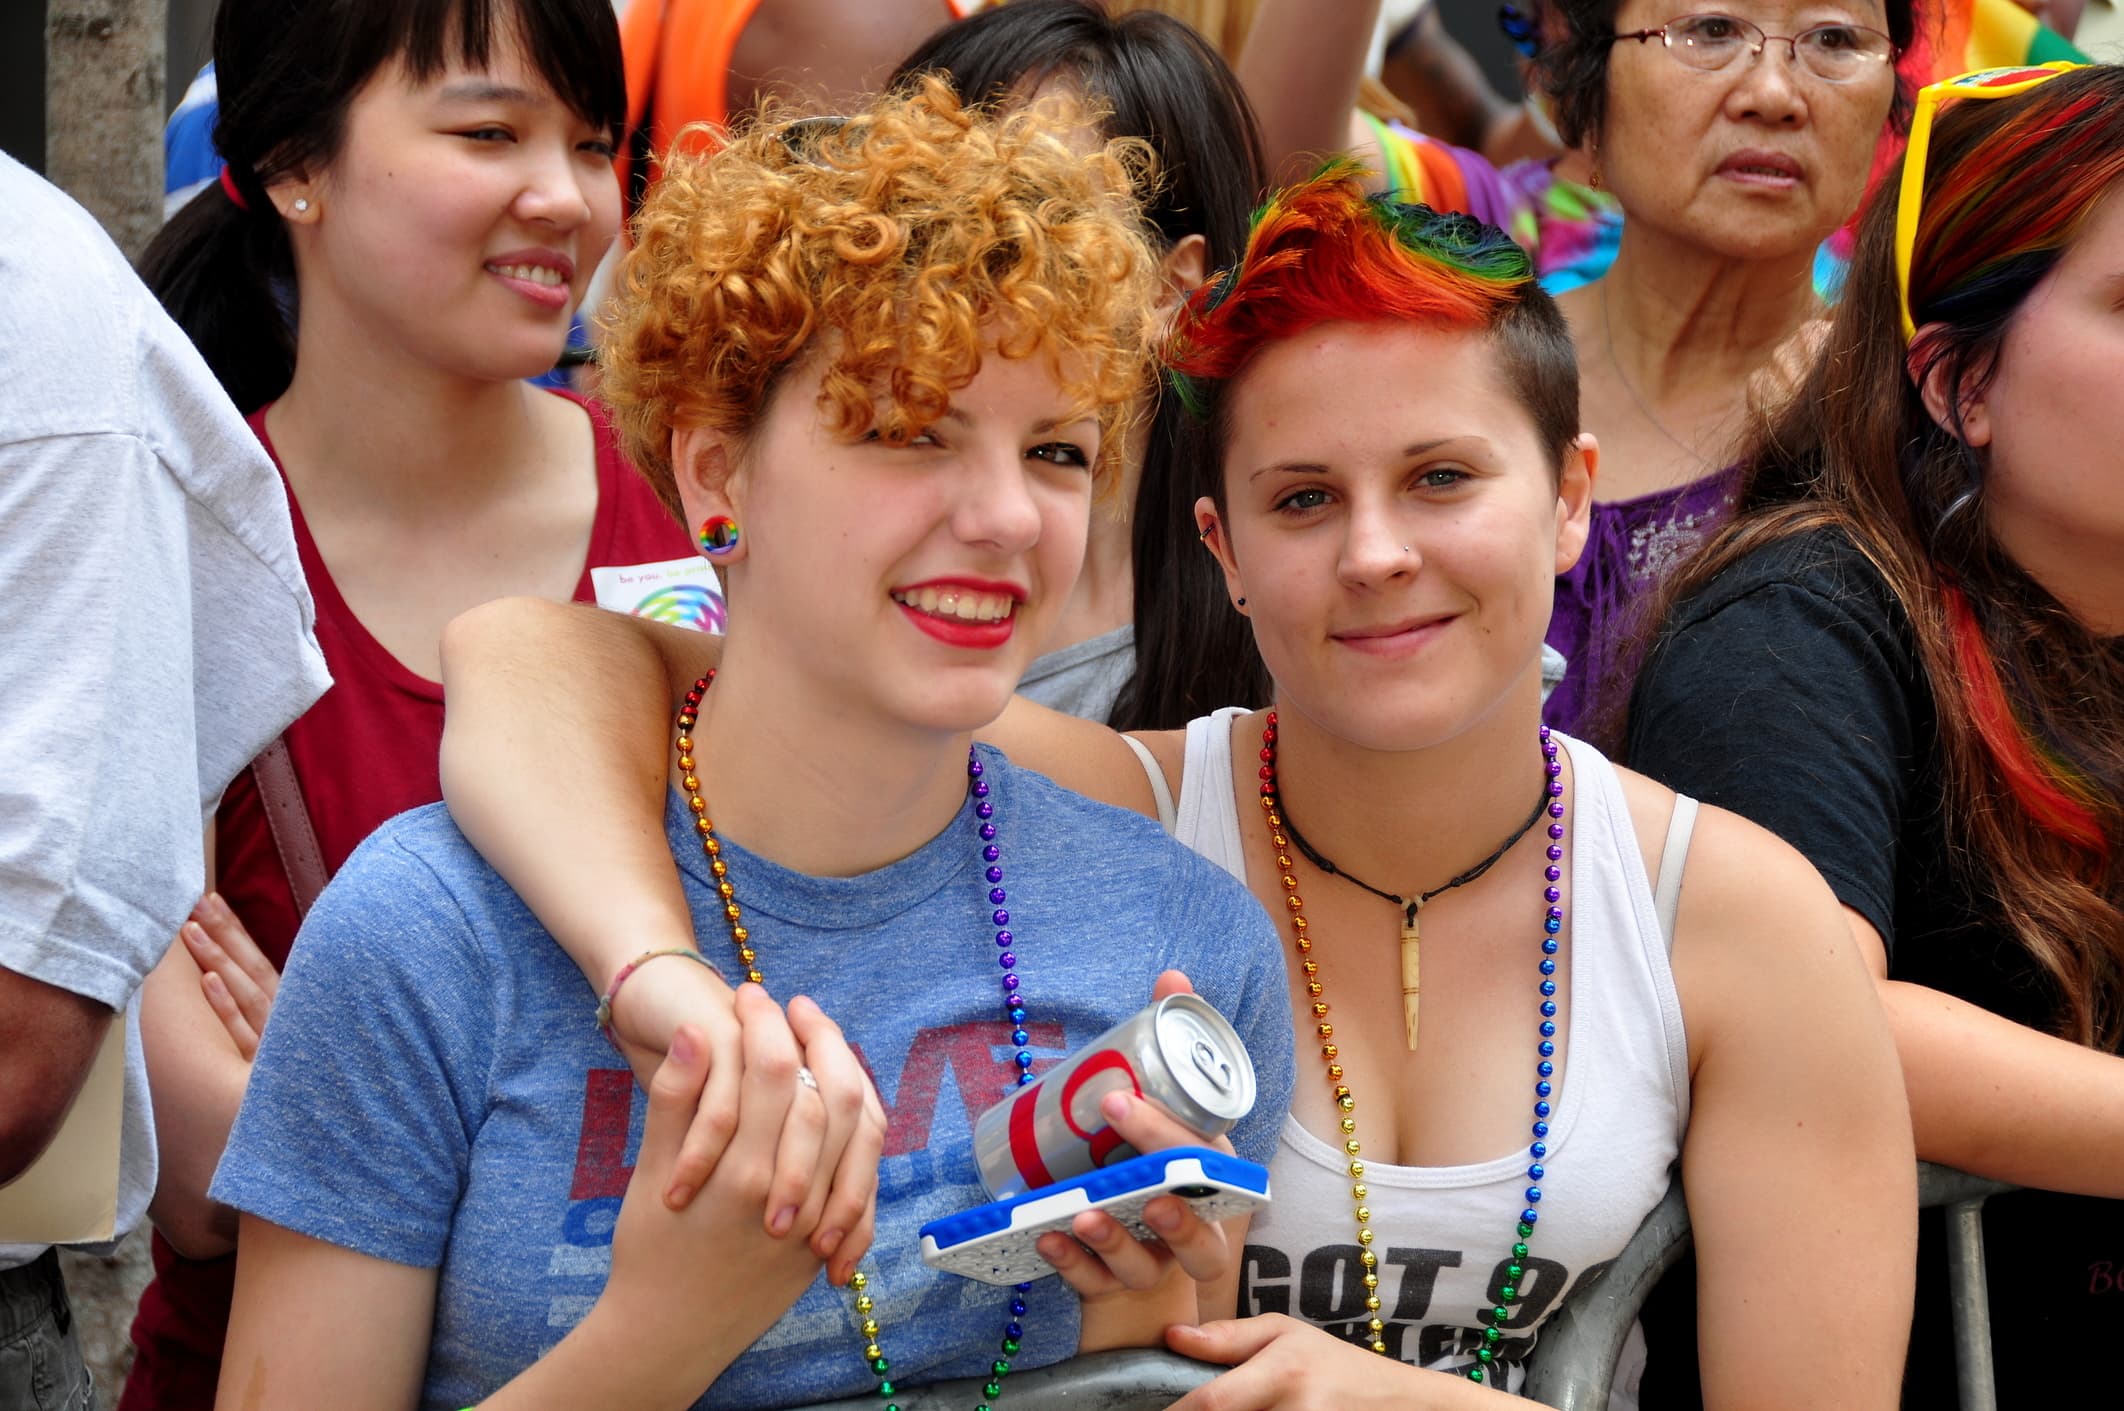 NYC Pride Parade, two women watch